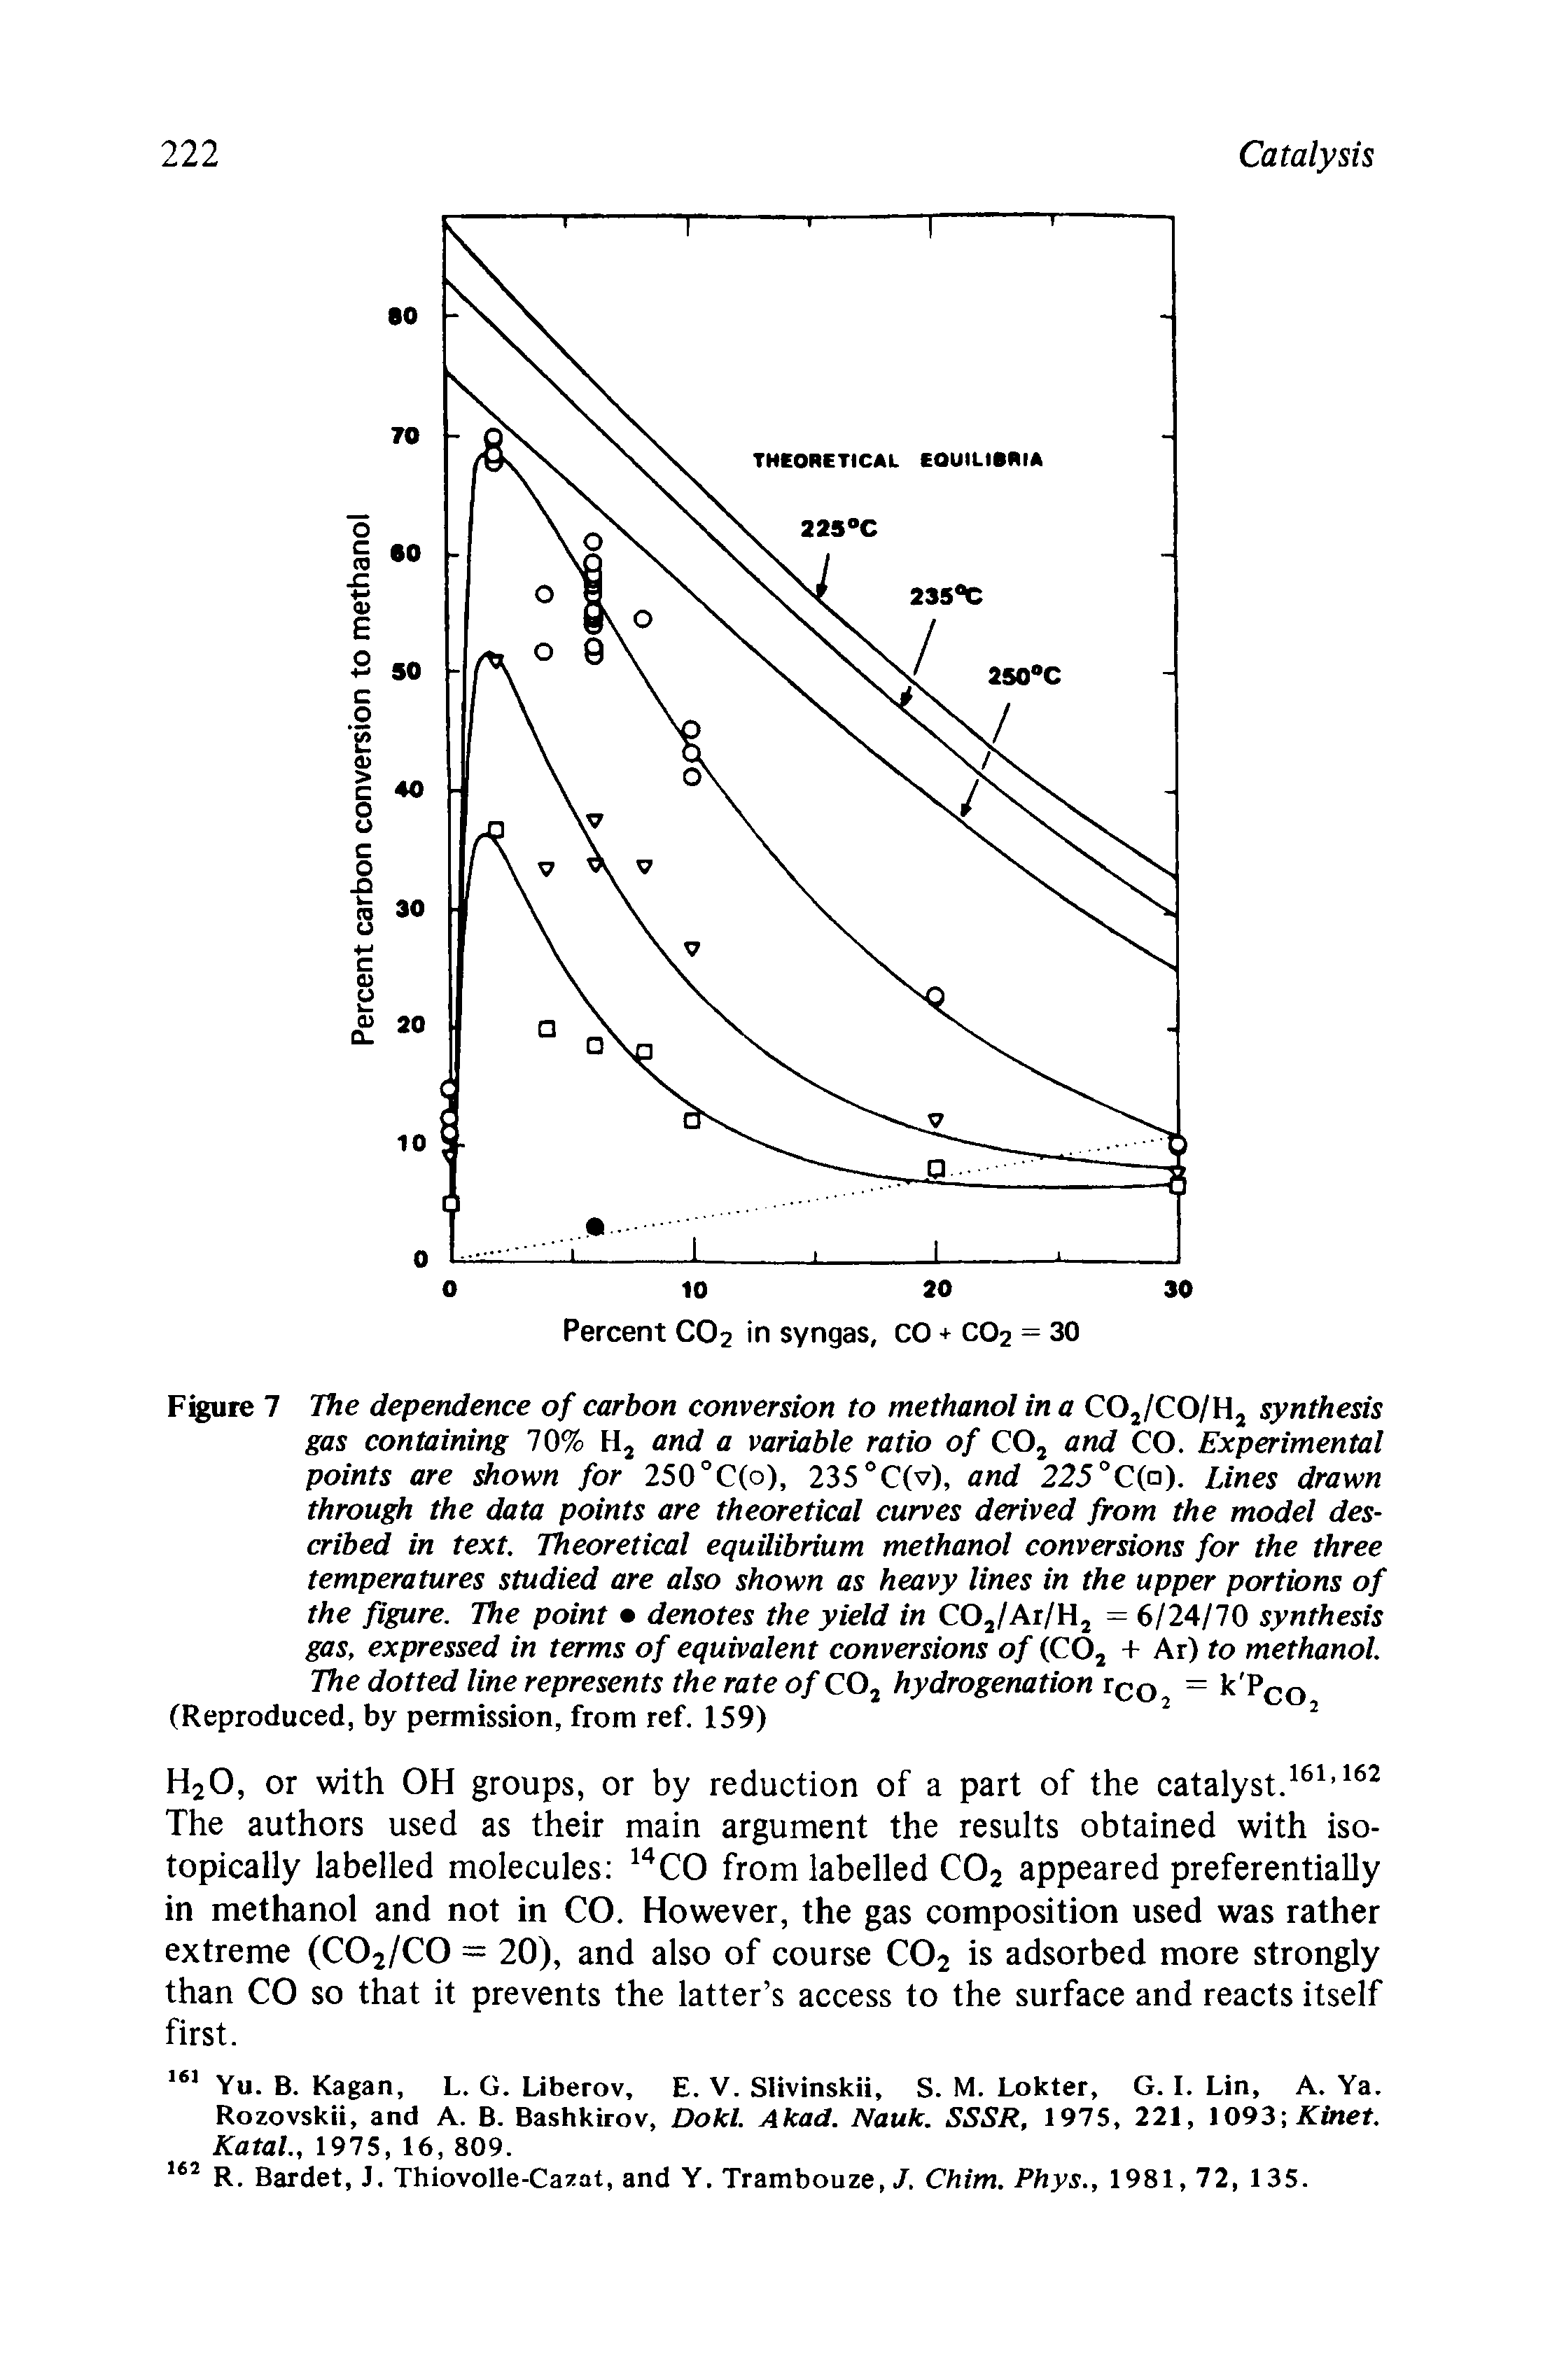 Figure 7 The dependence of carbon conversion to methanol in a COj/CO/Hj synthesis gas containing 70% Hj and a variable ratio of COj and CO. Experimental points are shown for 250°C(o), 235°C(v), and 225°C(a). Lines drawn through the data points are theoretical curves derived from the model described in text. Theoretical equilibrium methanol conversions for the three temperatures studied are also shown as heavy lines in the upper portions of the figure. The point denotes the yield in COj/Ar/H, = 6/24/70 synthesis gas, expressed in terms of equivalent conversions of (CO + Ar) to methanol. The dotted line represents the rate of CO hydrogenation rco = co (Reproduced, by permission, from ref. 159) ...